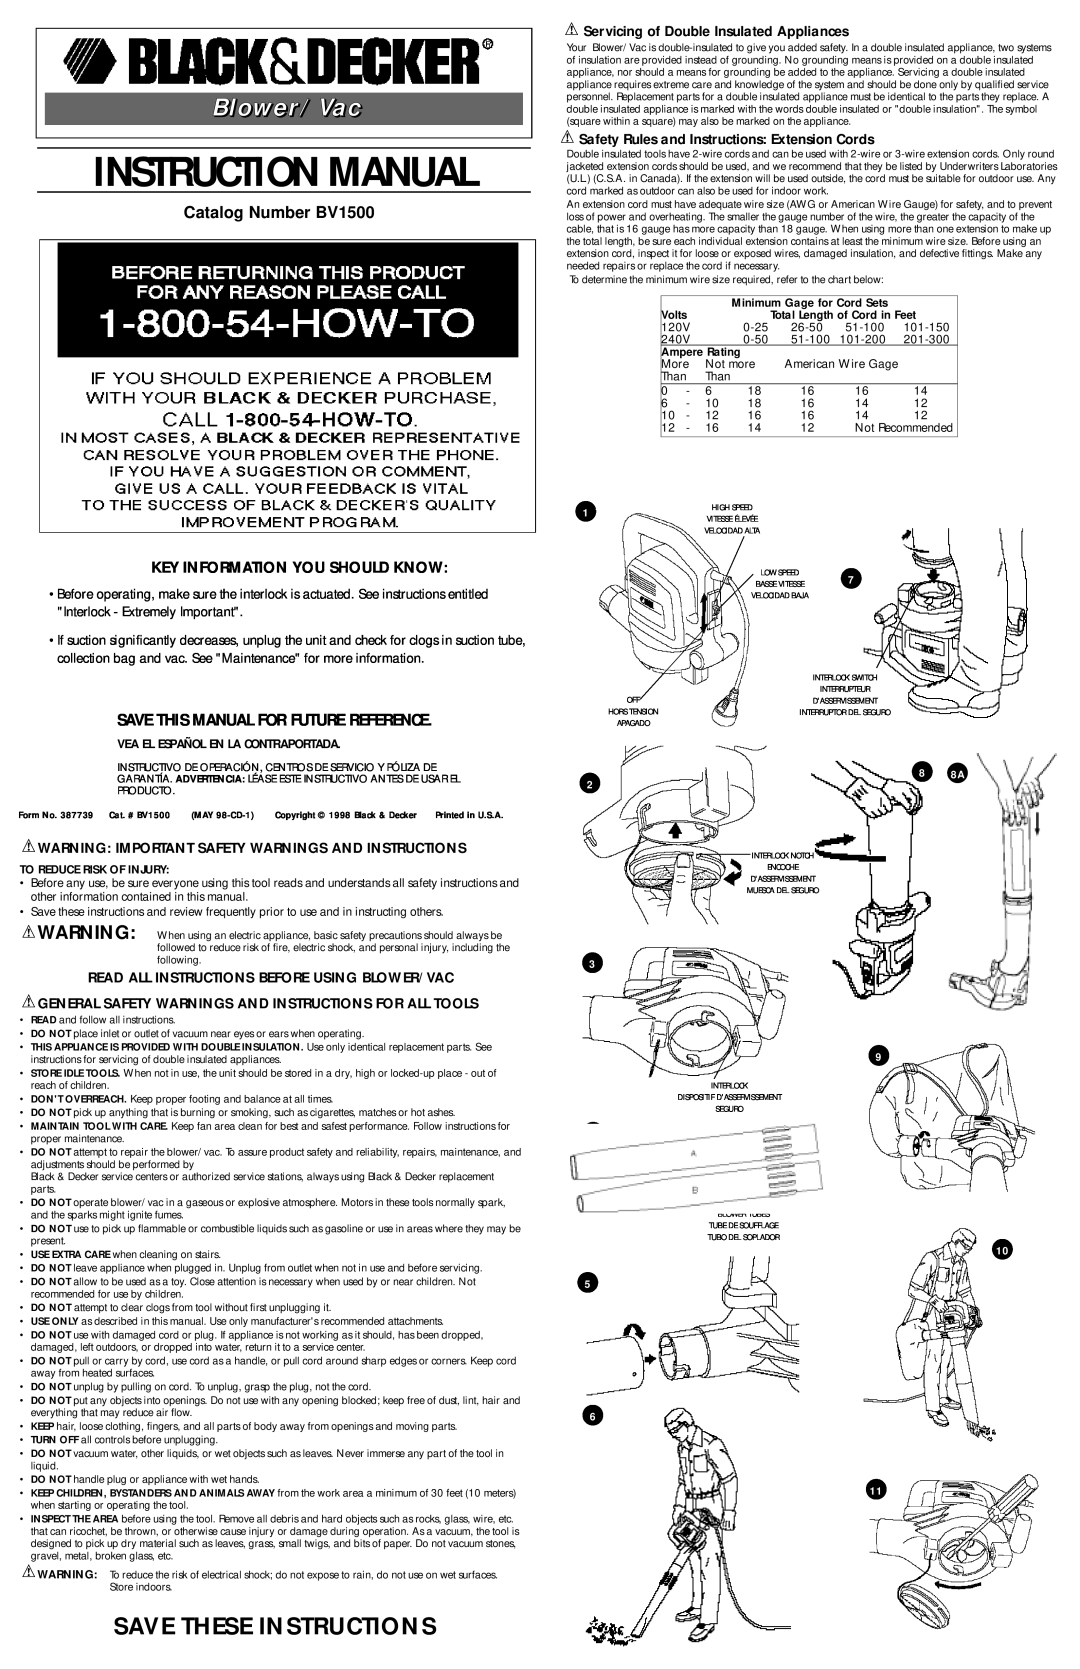 Black & Decker 387739 instruction manual Blower/Vac, Save These Instructions, Catalog Number BV1500, 8 8A 